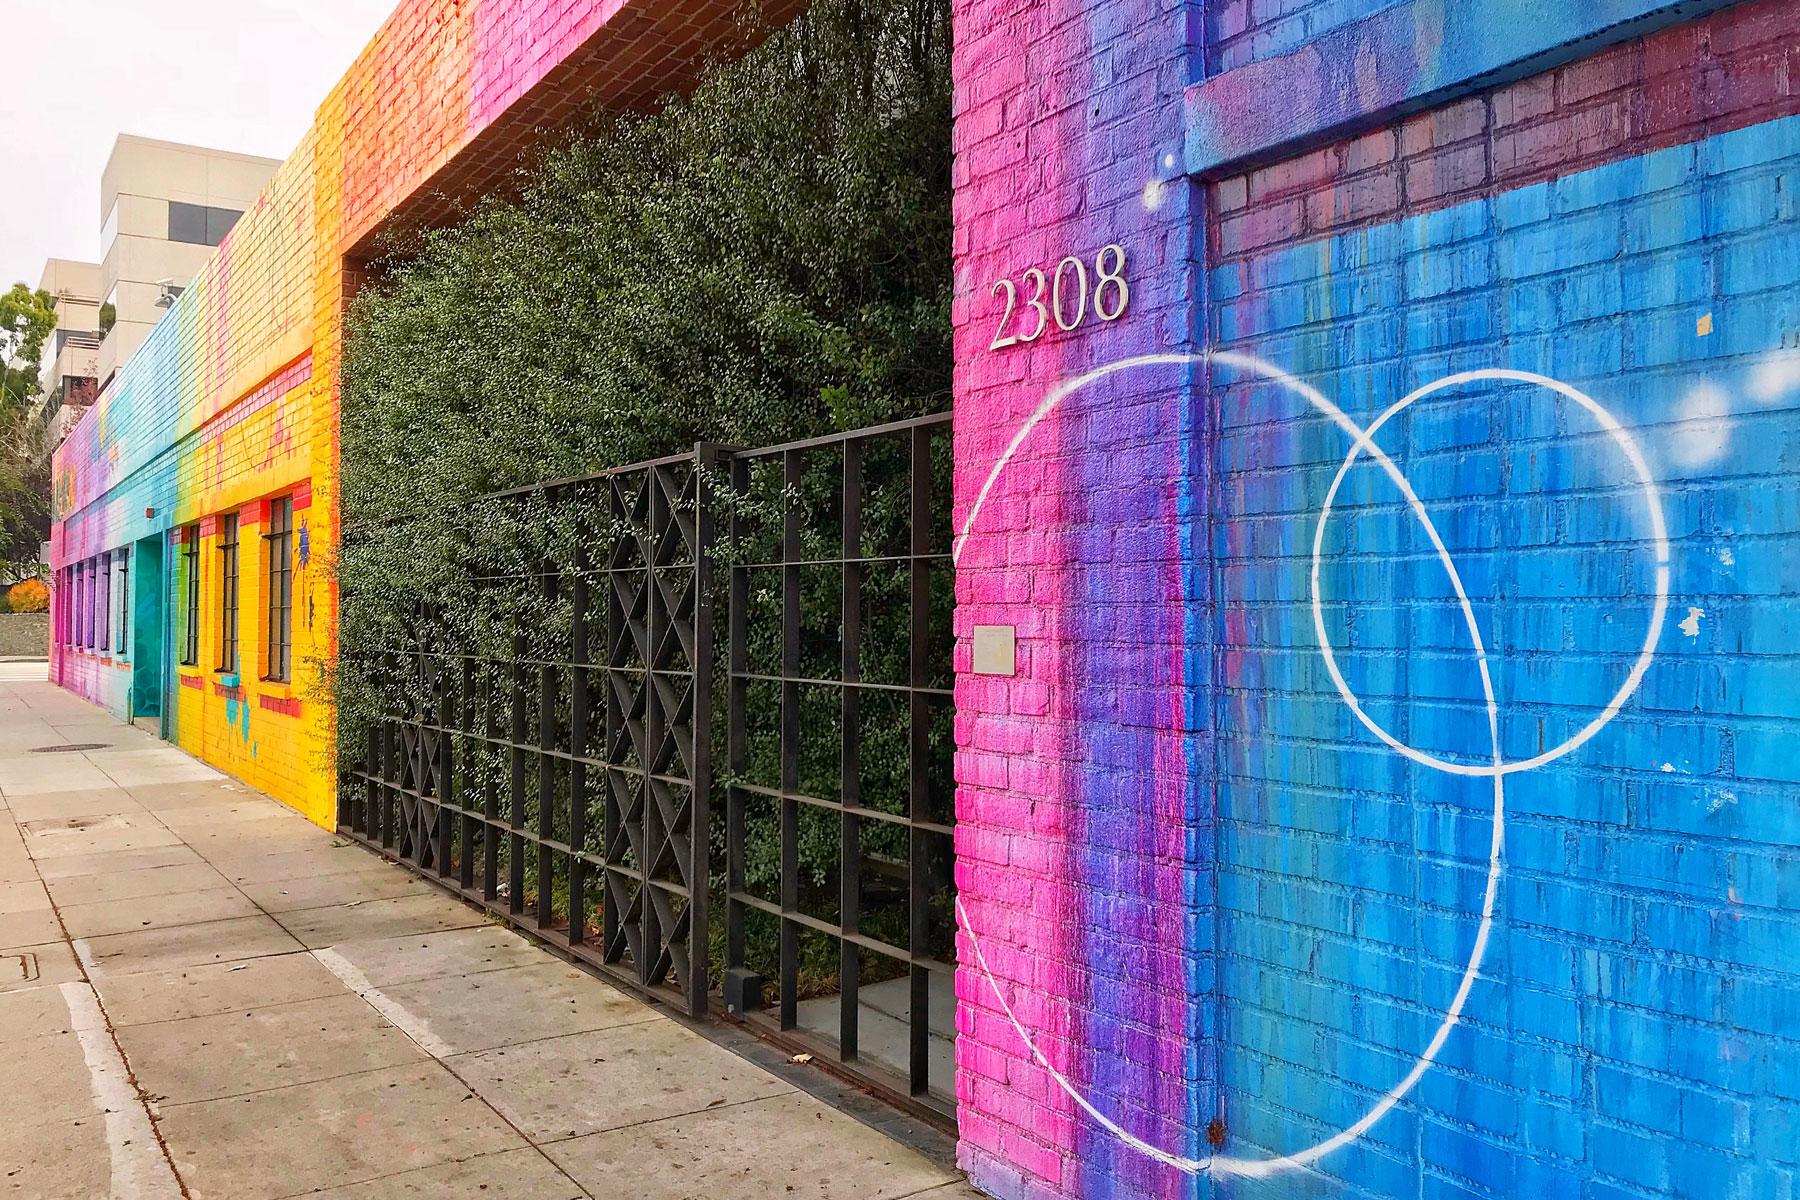 Los Angeles' 12 Most Instagram-Worthy Walls – Fodors Travel Guide